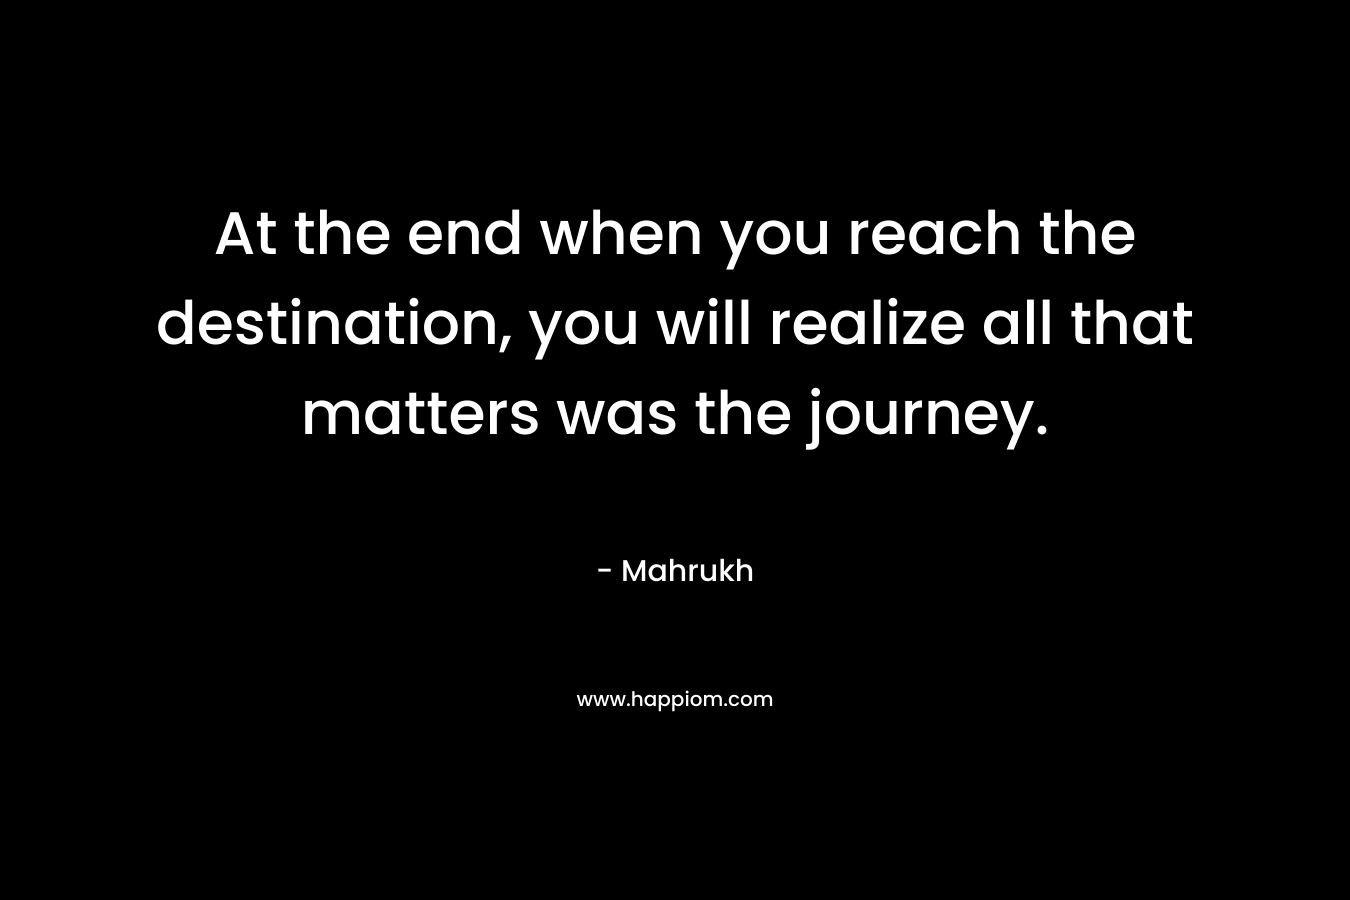 At the end when you reach the destination, you will realize all that matters was the journey.